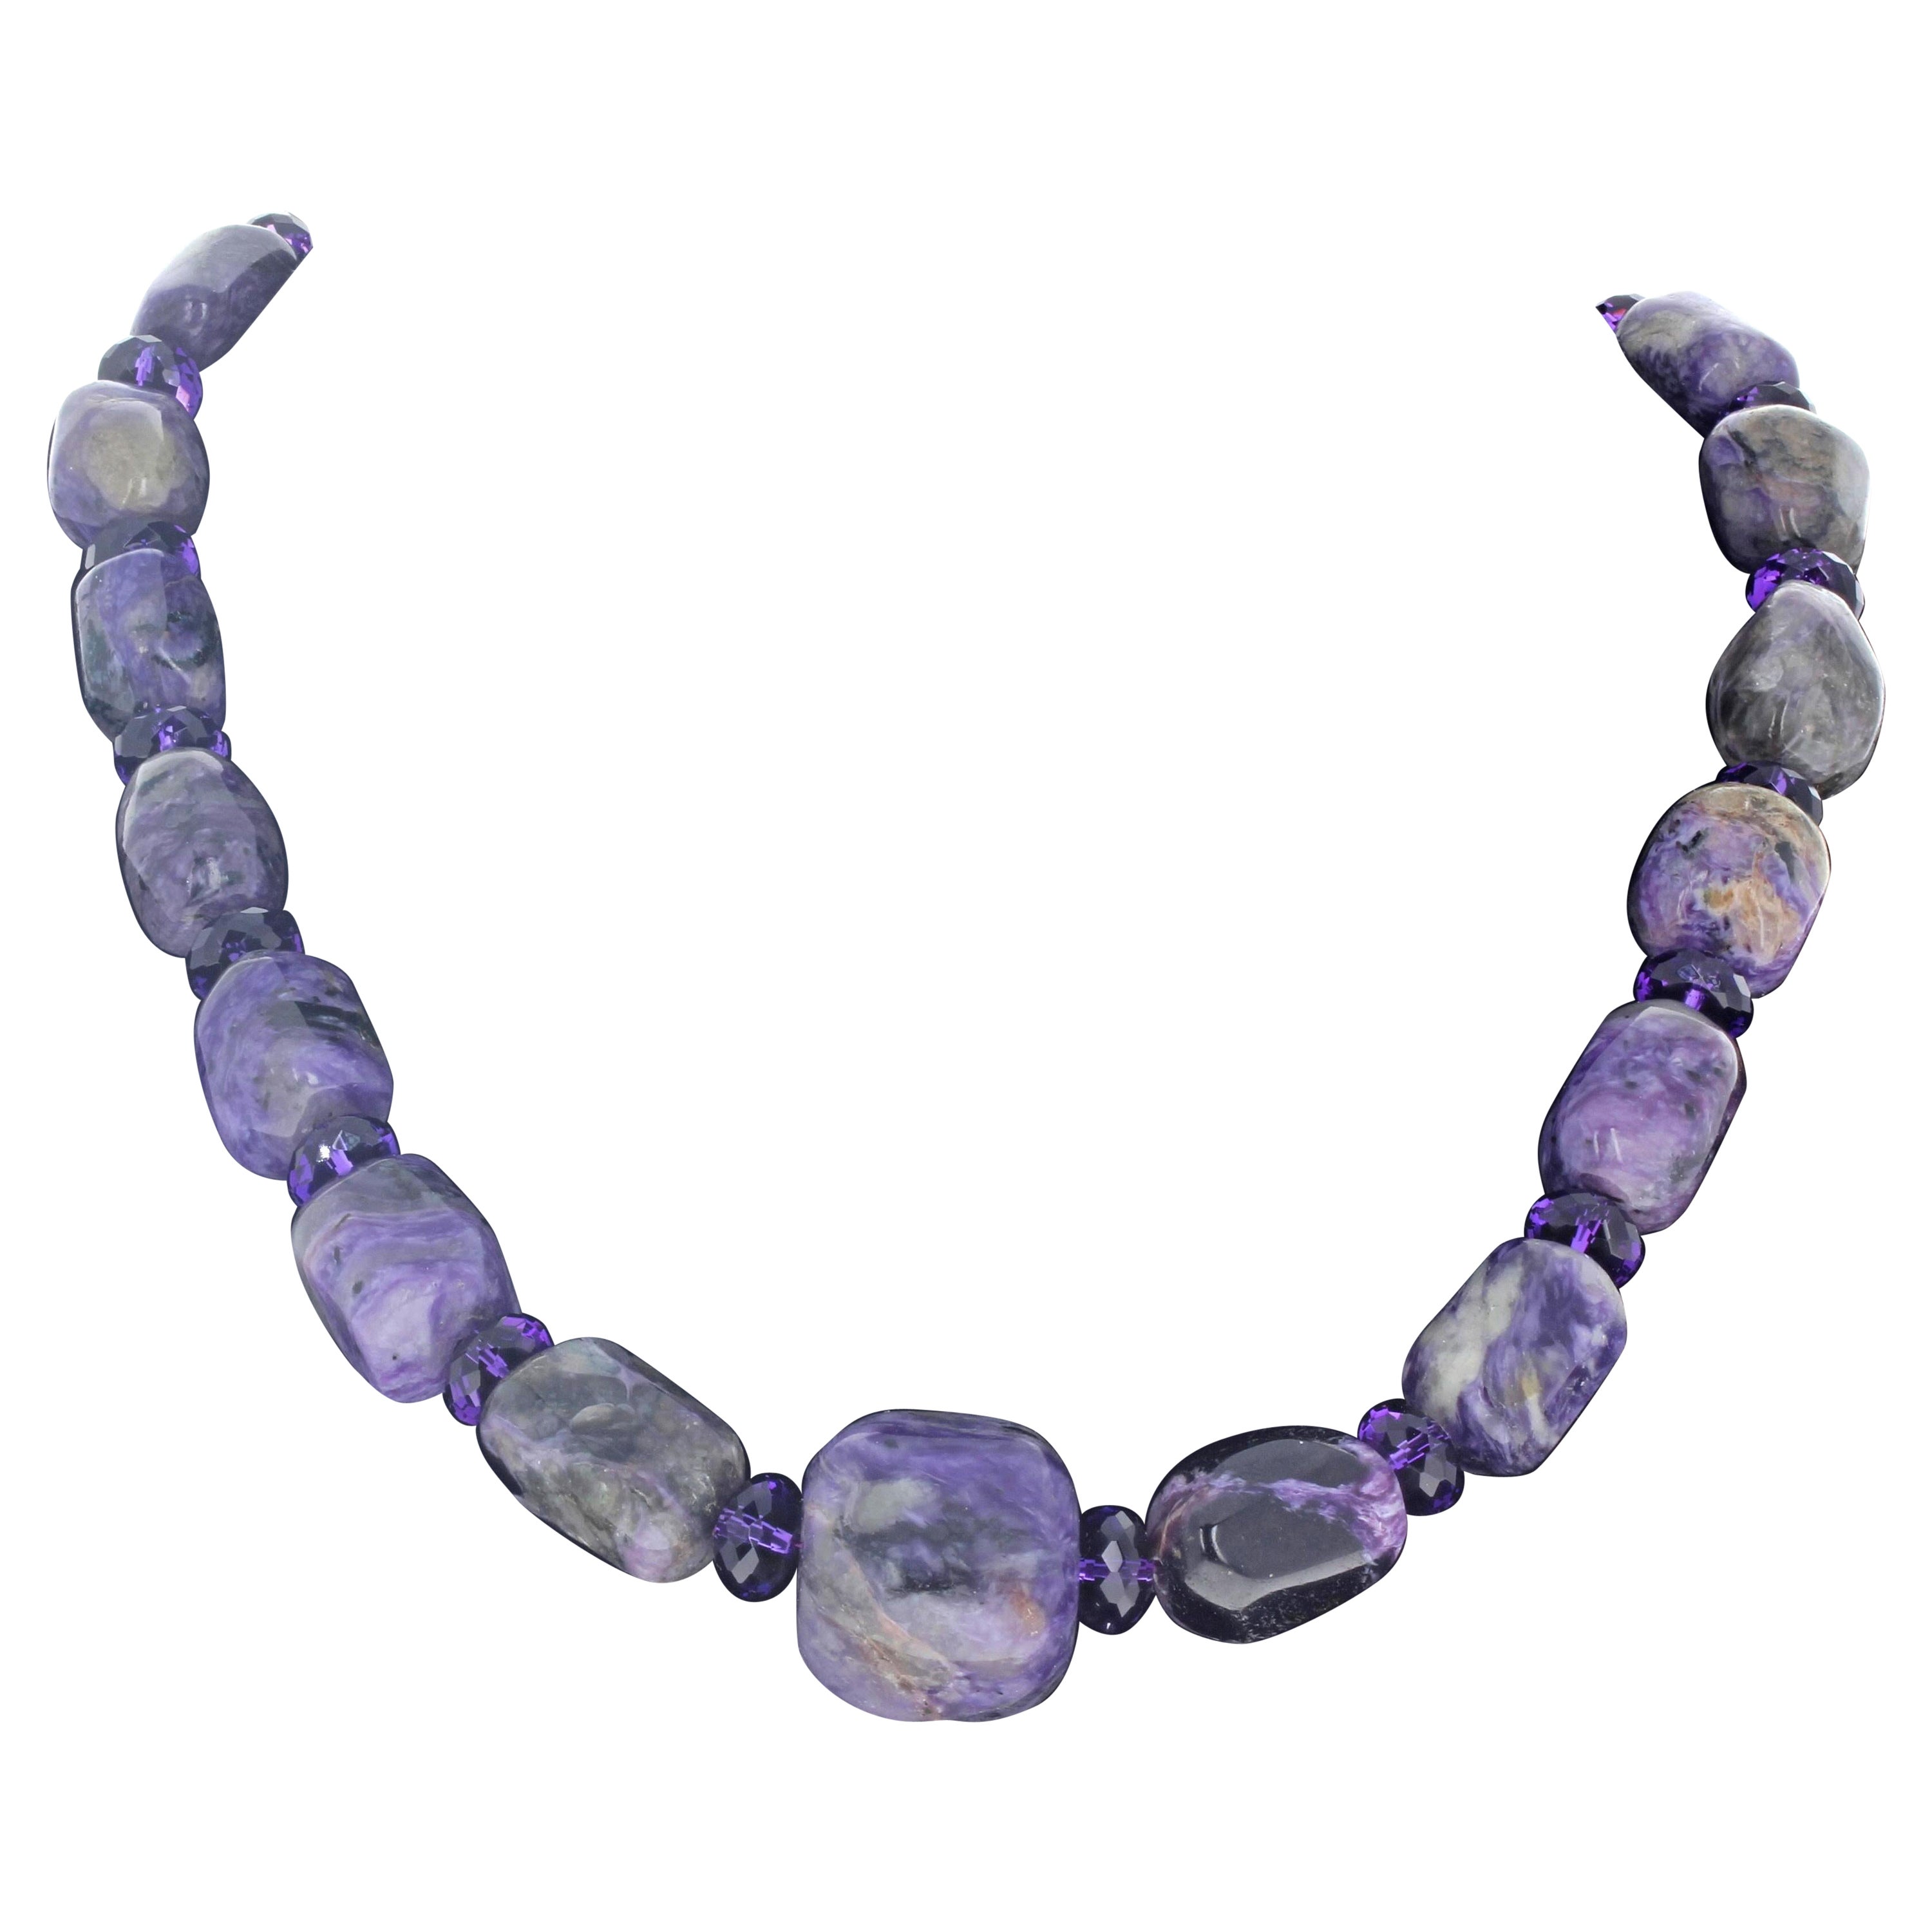 These are natural Ruby Zoizites - the largest approximately 19mm x 19mm - enhanced with beautiful natural gem cut real Amethyst -  approximately 19mm.  This beautiful necklace is 19 inches long.  The clasp is a easy to use gold plated hook clasp. 